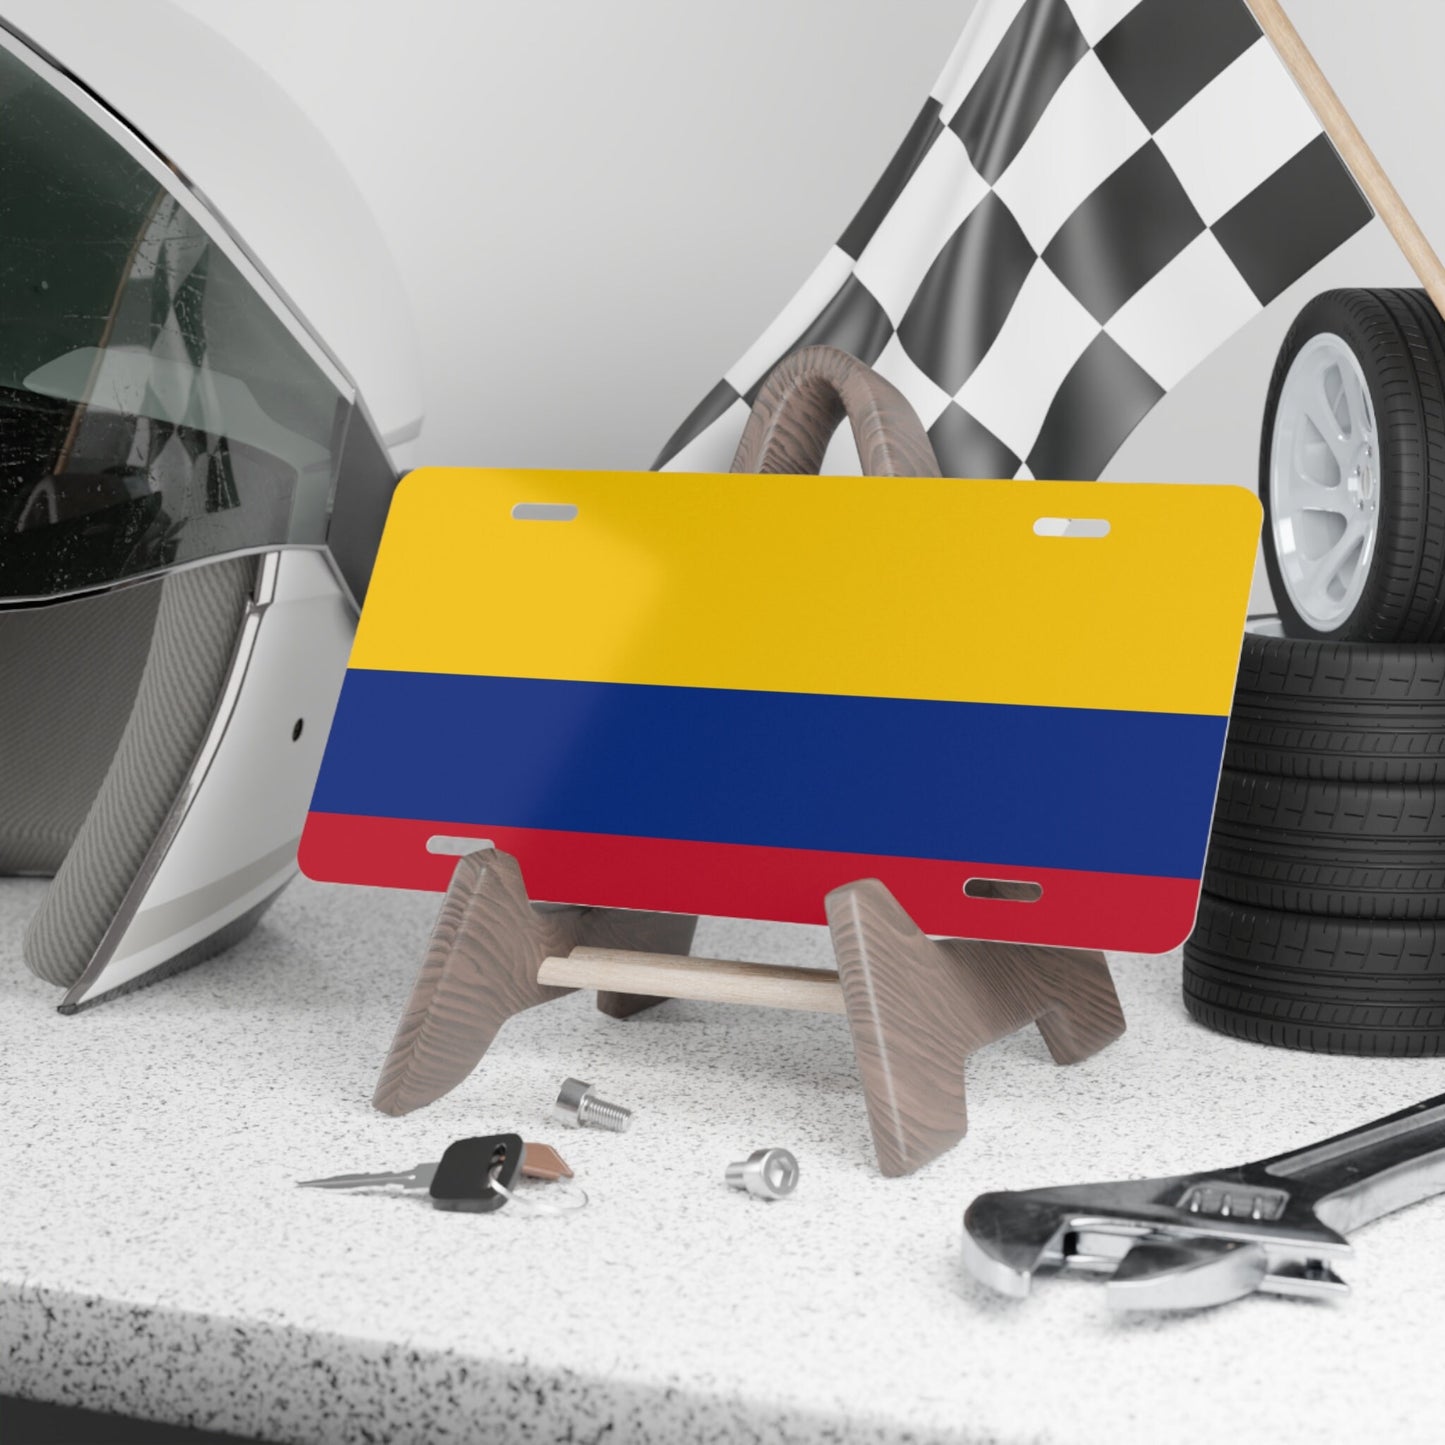 Colombia Flag Car Plate tag